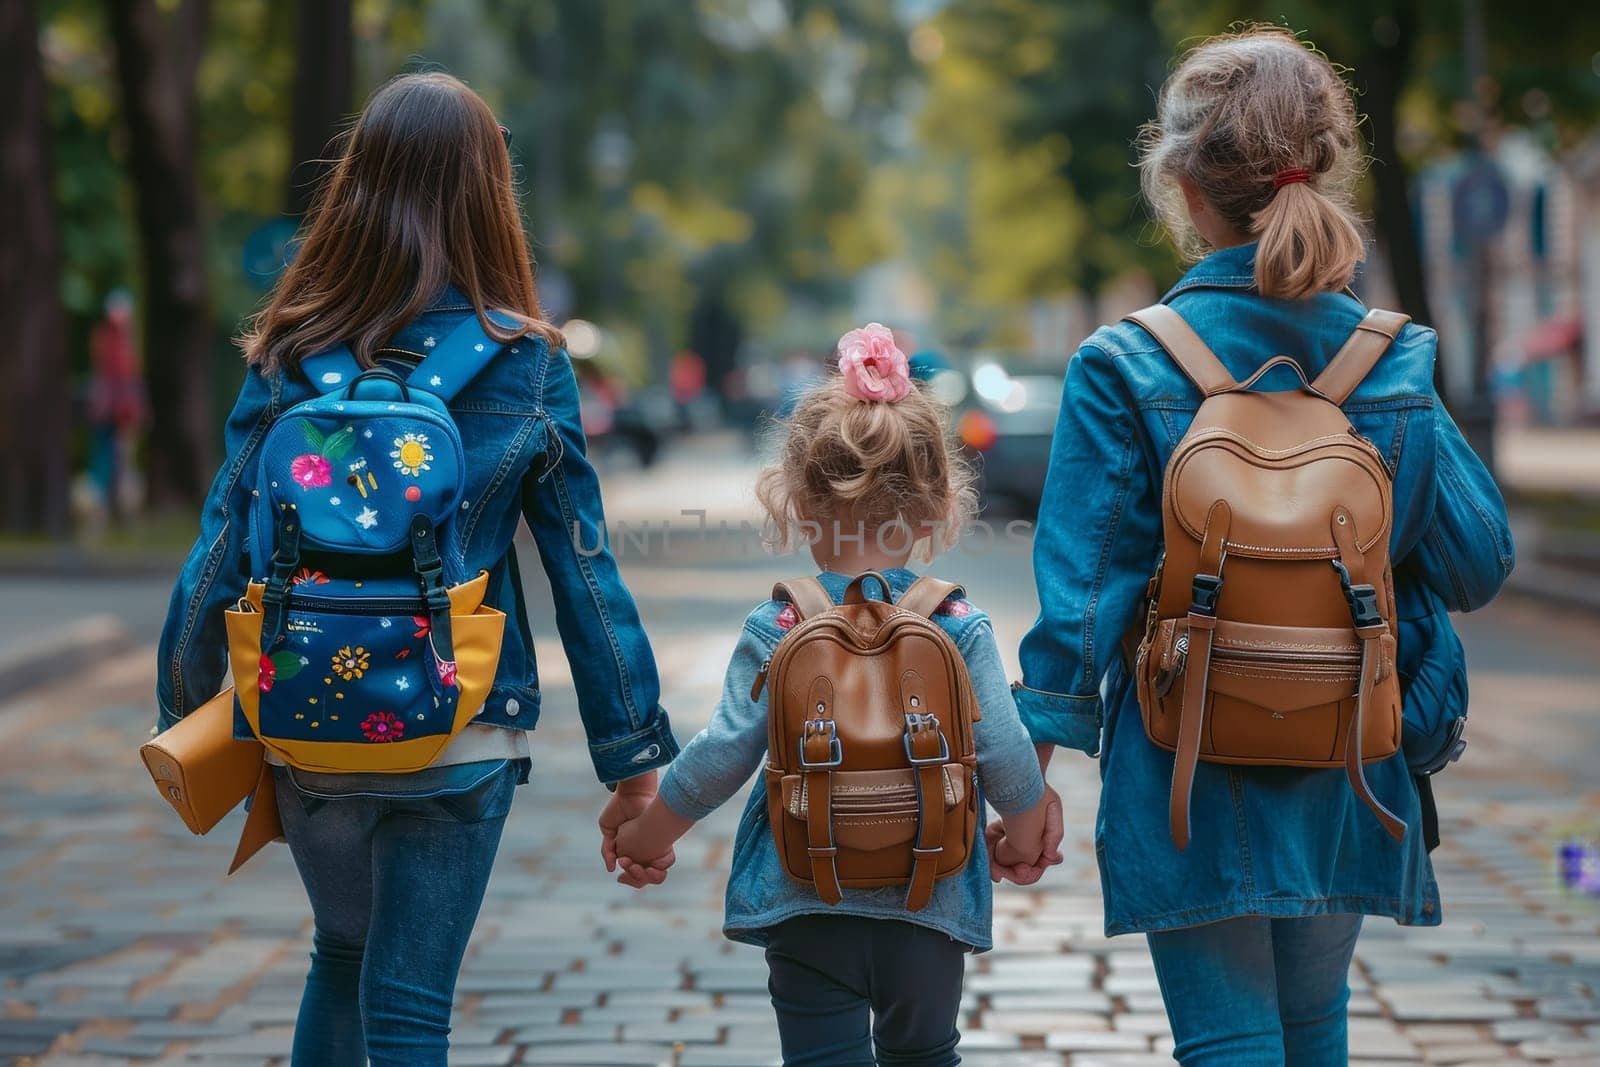 Three girls are walking down a street, each carrying a backpack. The girls are holding hands, and they seem to be enjoying their walk. Concept of friendship and camaraderie among the girls